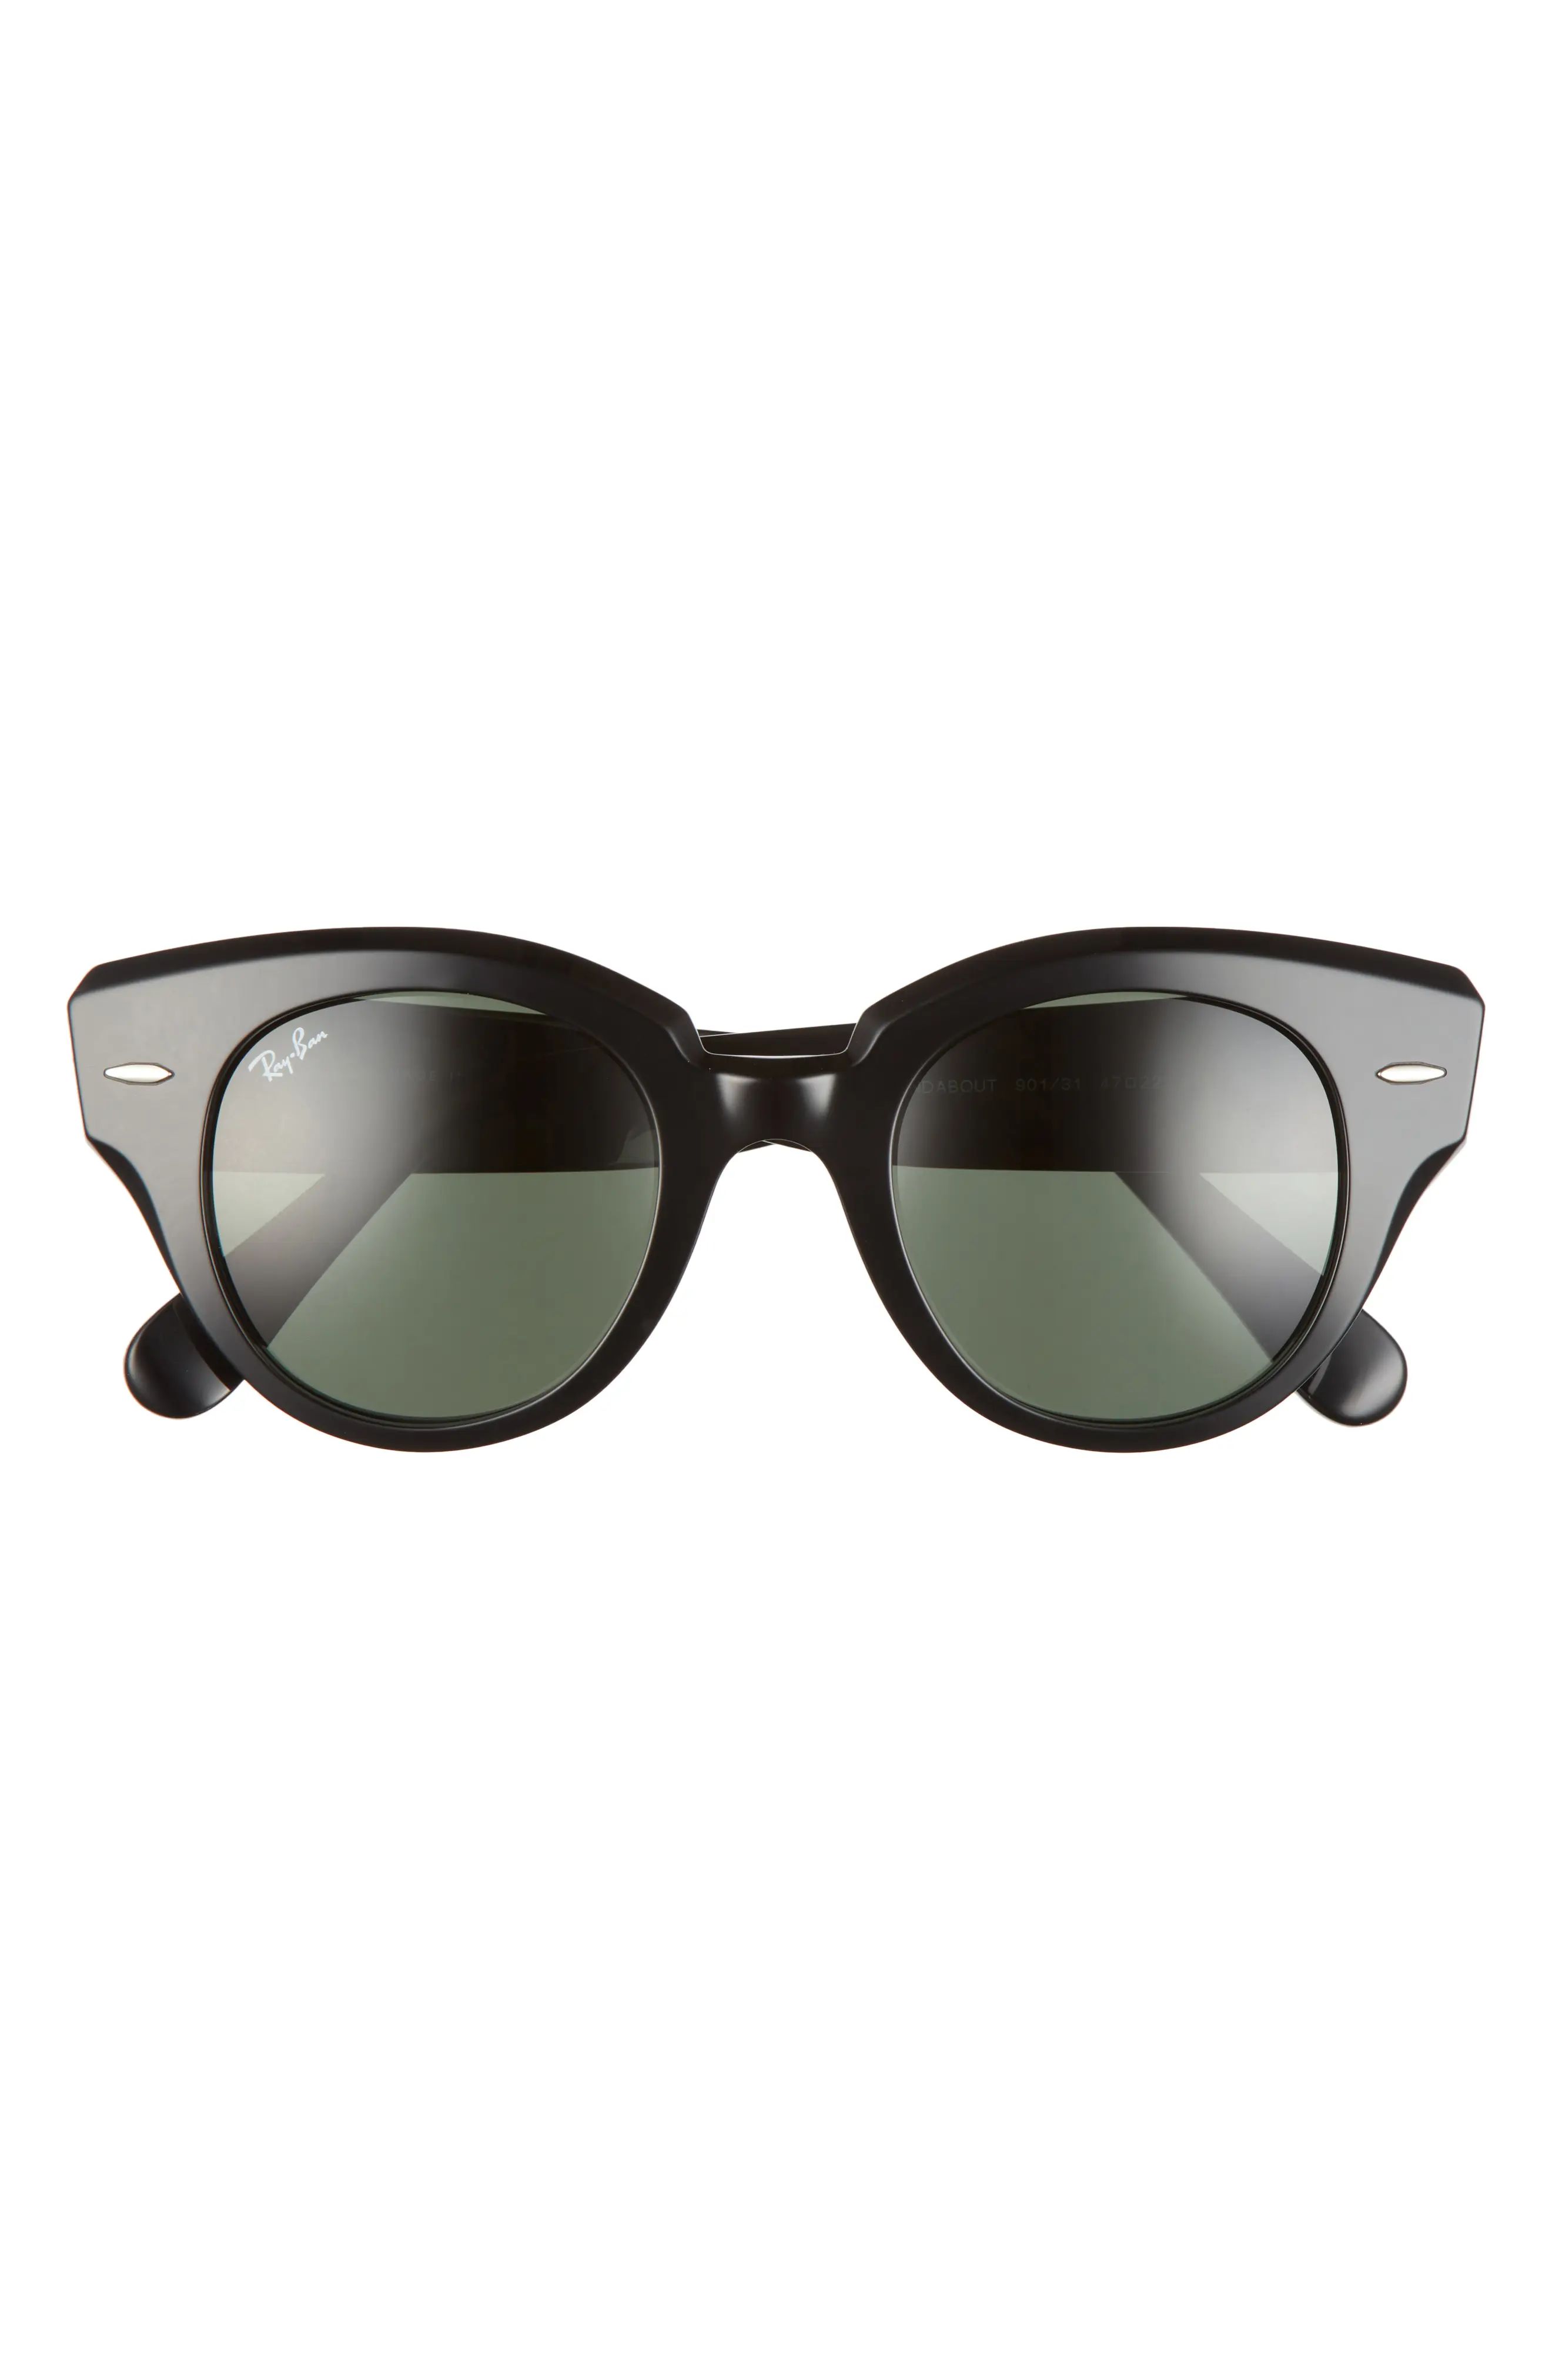 Women's Ray-Ban Roundabout 47mm Round Sunglasses - Black / Green | Nordstrom